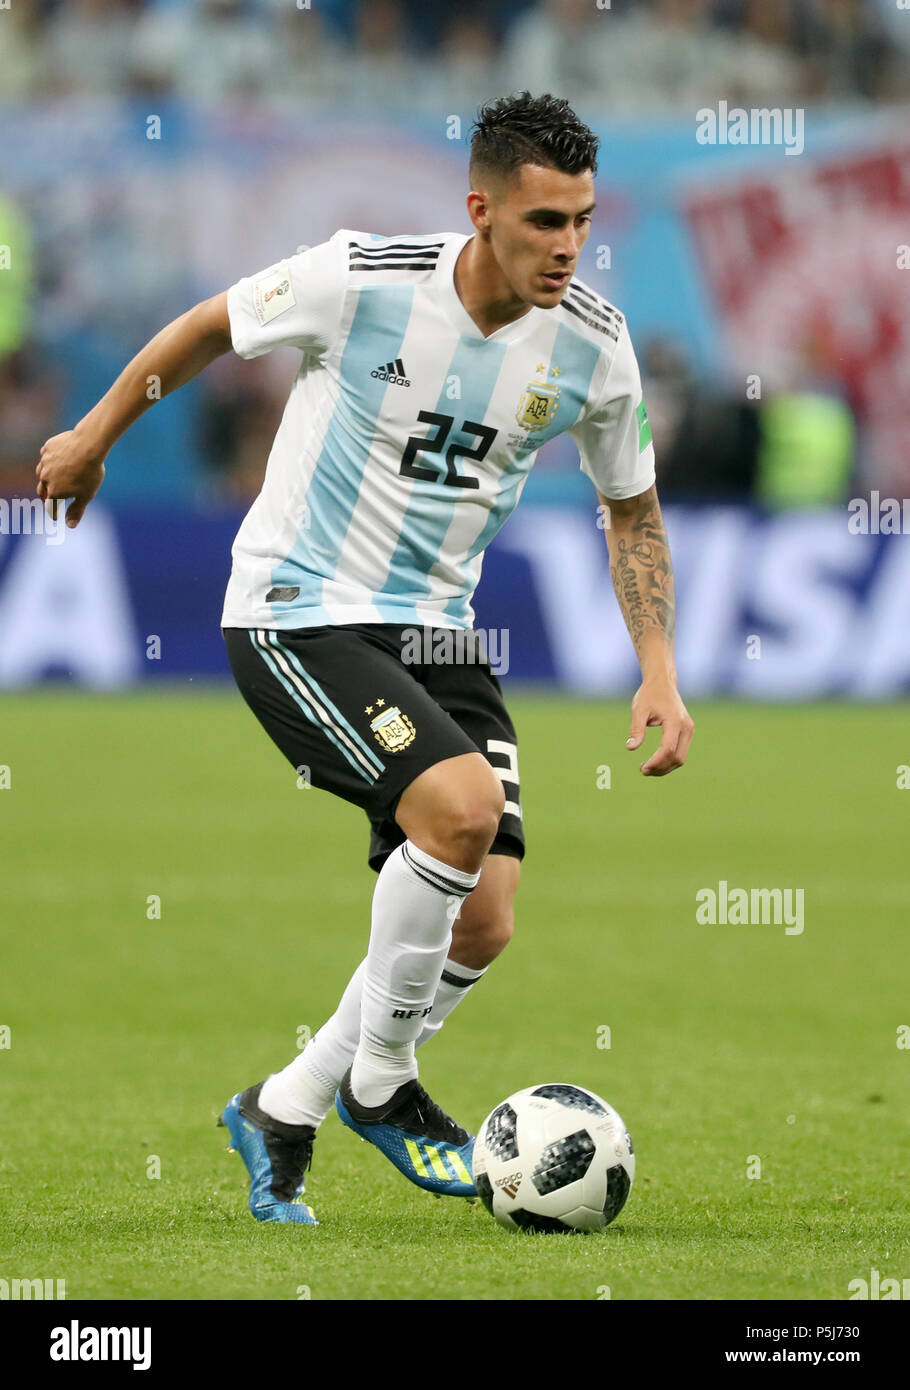 Moscow, Russia. 26th June, 2018. Soccer, World Cup 2018, Preliminary round, Group D, 3rd game day, Nigeria vs Argentina at the St. Petersburg Stadium: Argentina's Cristian Pavon in action. Credit: Cezaro De Luca/dpa/Alamy Live News Stock Photo